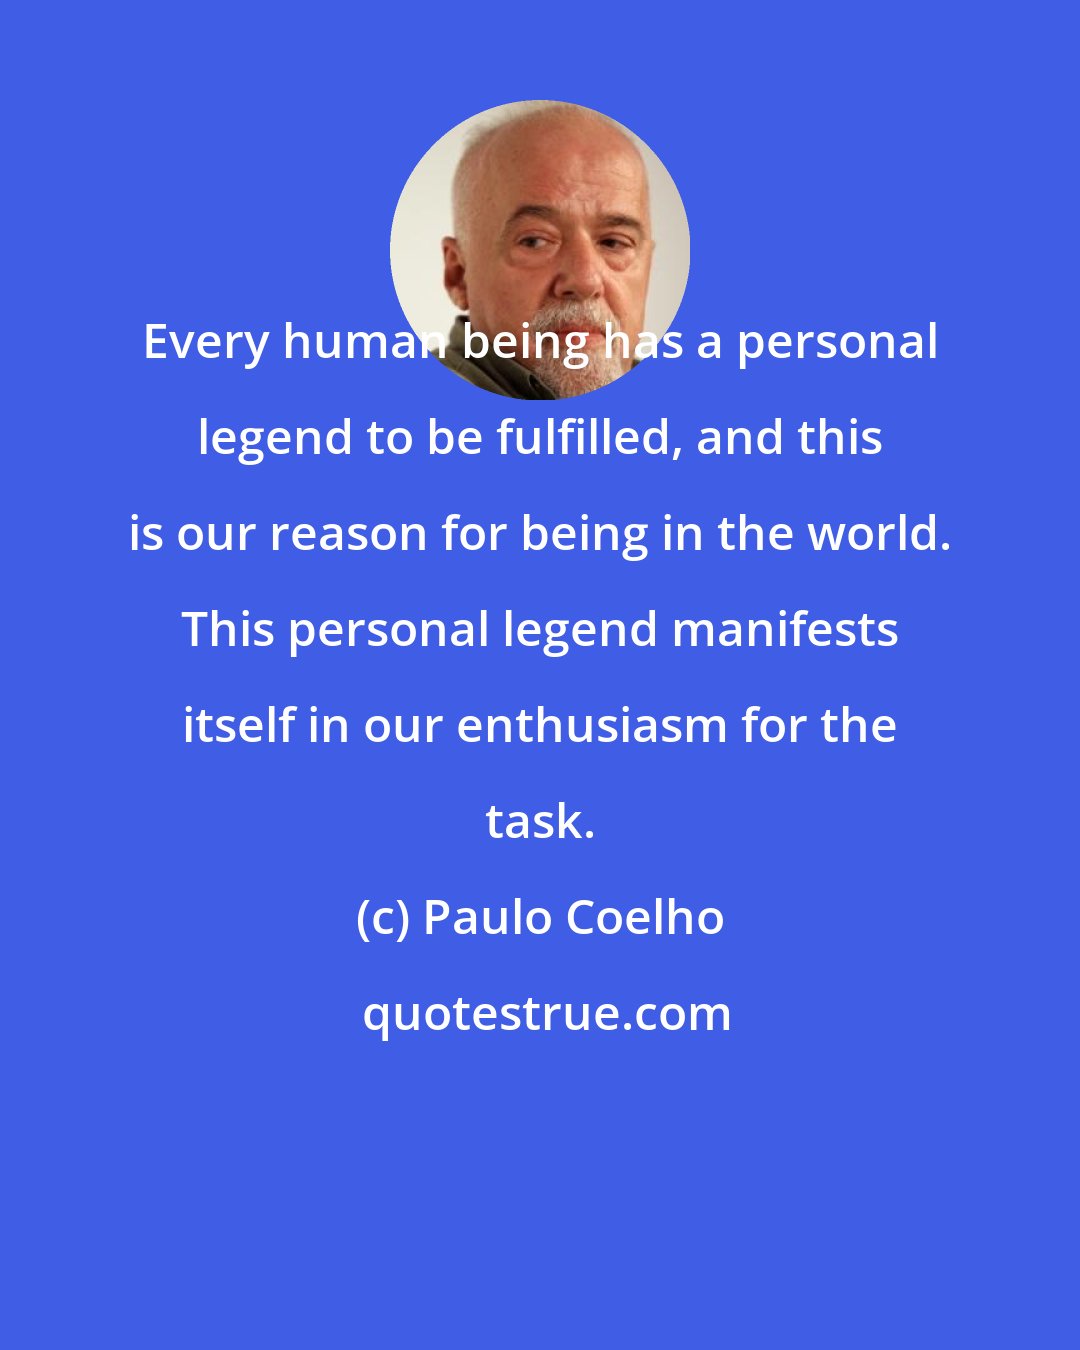 Paulo Coelho: Every human being has a personal legend to be fulfilled, and this is our reason for being in the world. This personal legend manifests itself in our enthusiasm for the task.